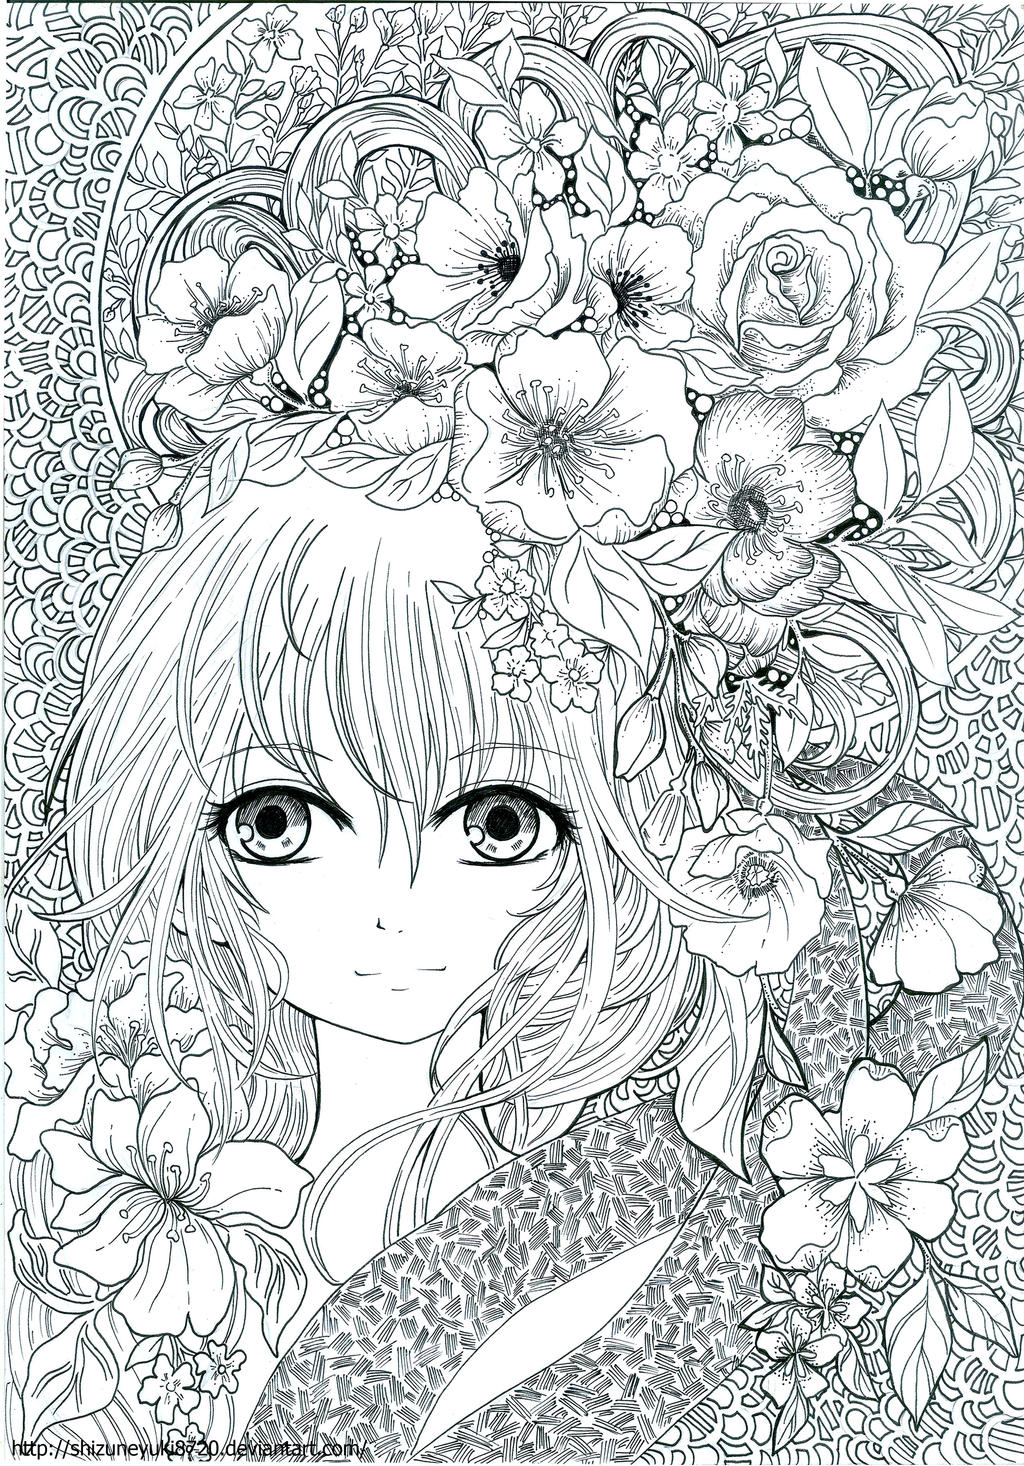 Download Adult coloring book: Floral Fantasy (Page 20) by shizuneyuki8720 on DeviantArt